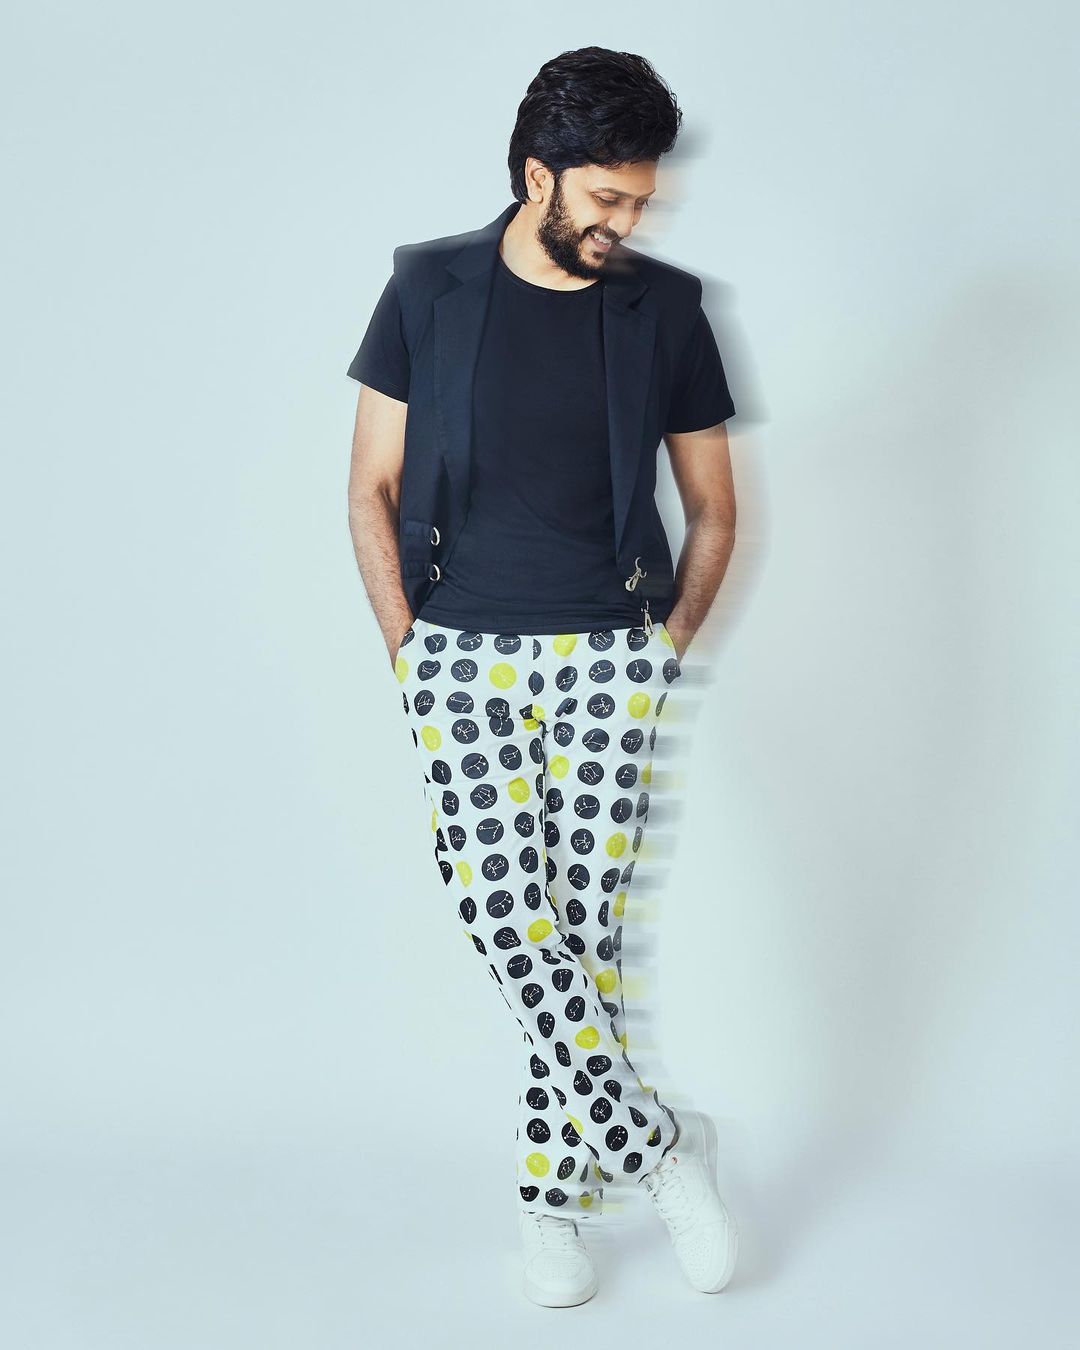 Riteish Deshmukh adds a pop of color to his ensemble designed by Crimsoune Club.